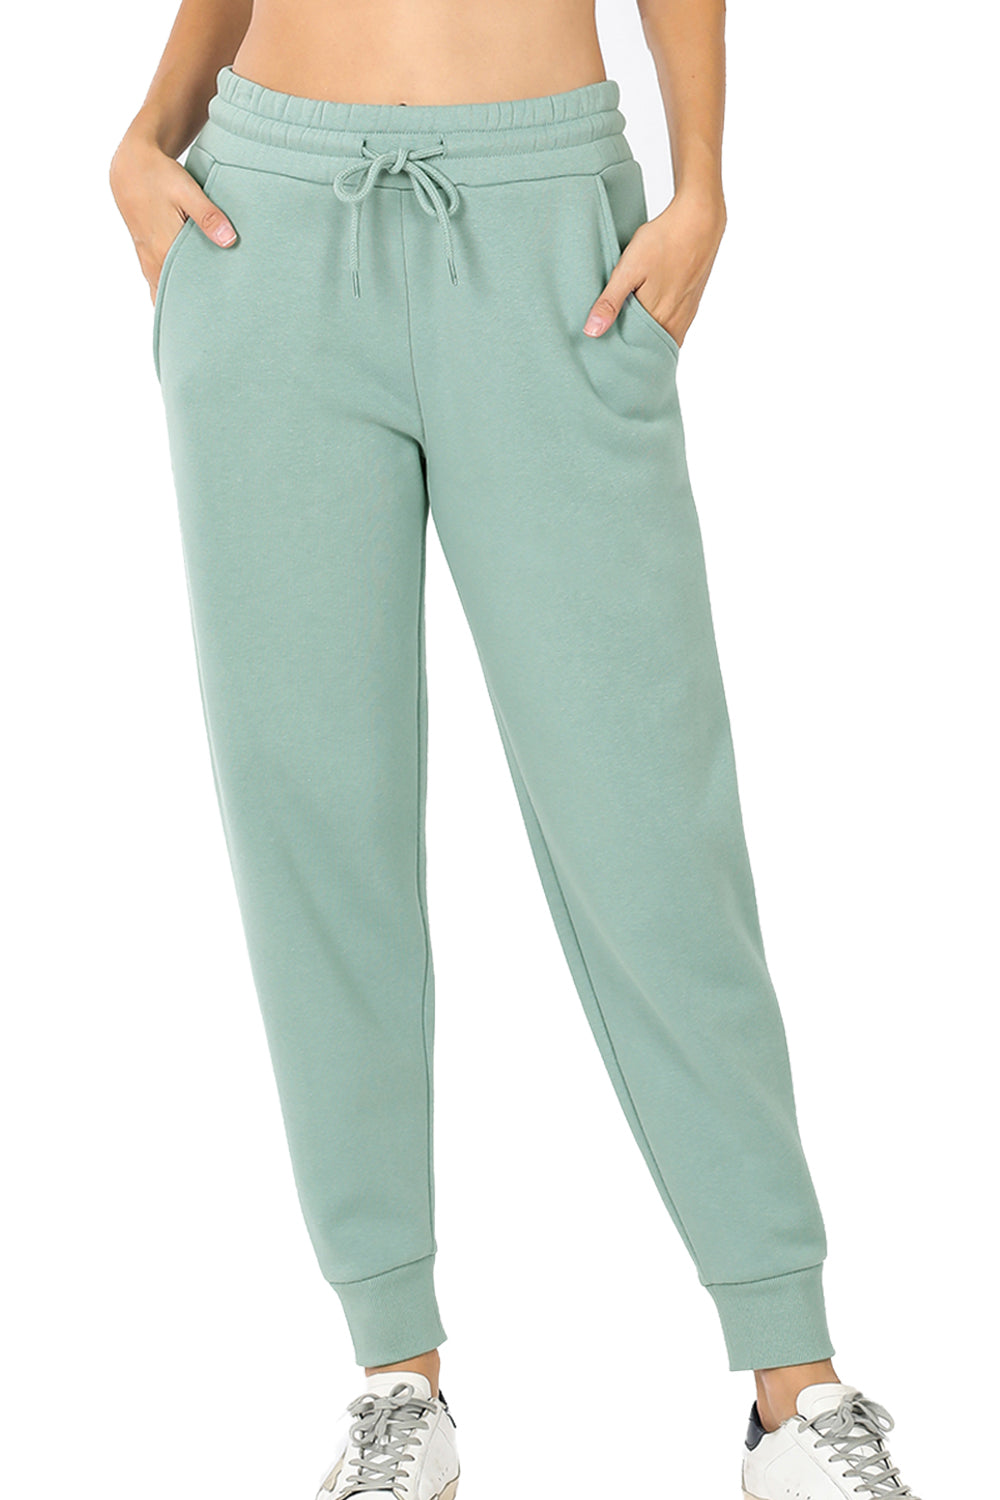 Women's Cotton Blend Relax Fit Cropped Jogger Lounge Sweatpants Running Pants